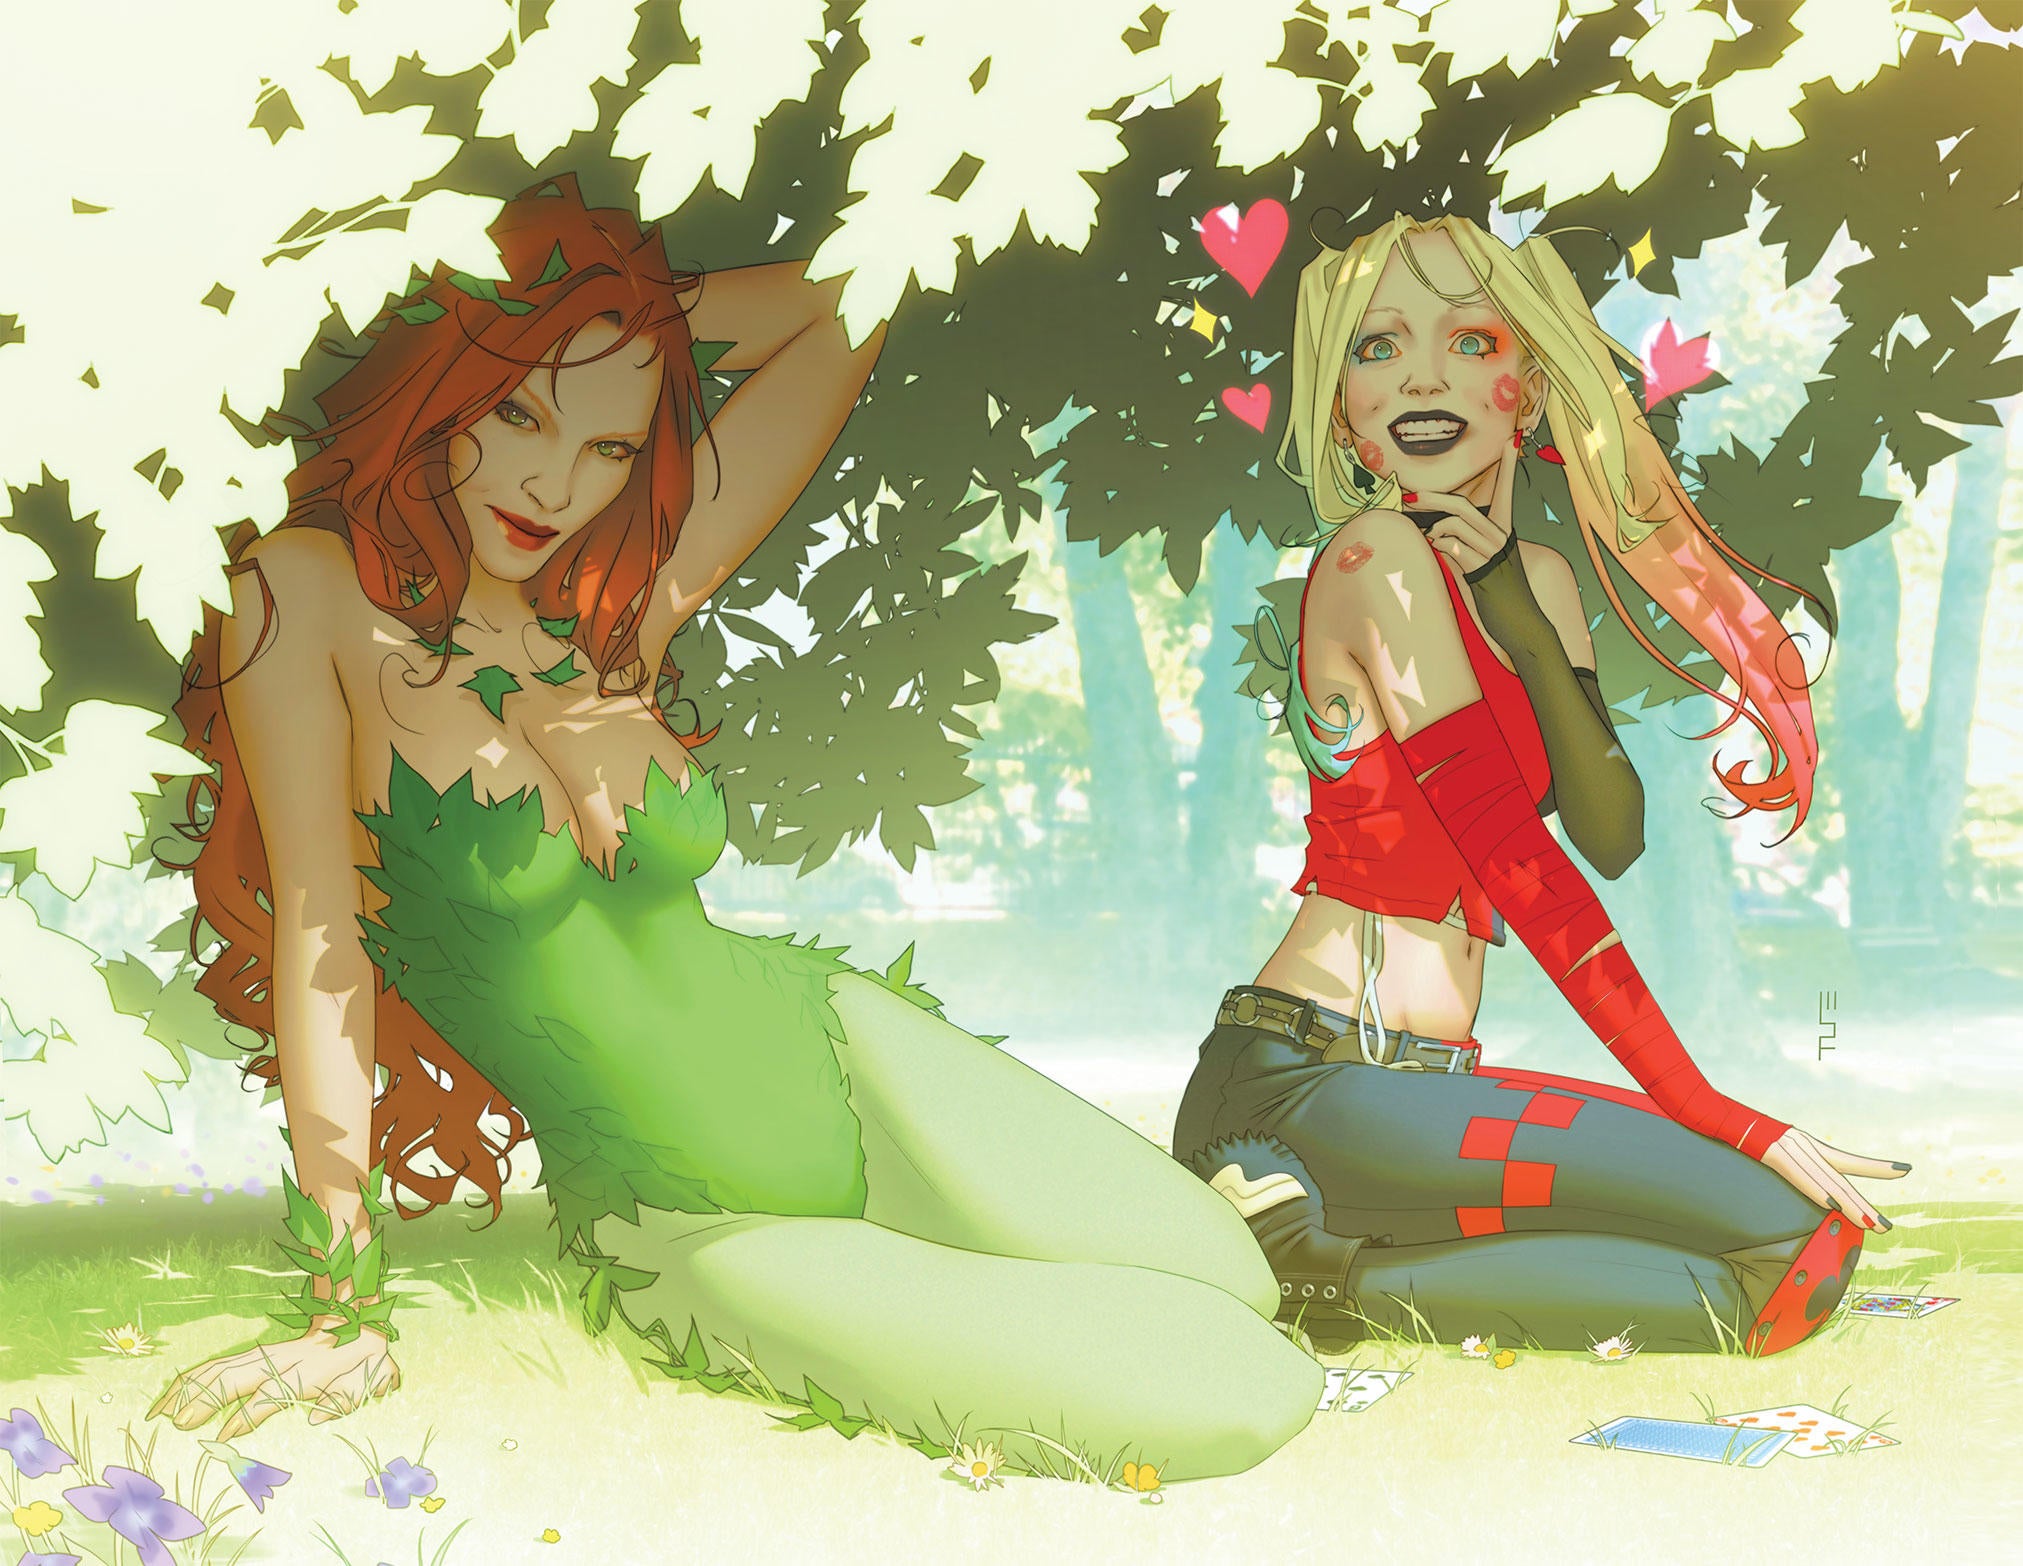 poison-ivy-23-and-harley-quinn-41-combined-pride-variant-forbes.jpg